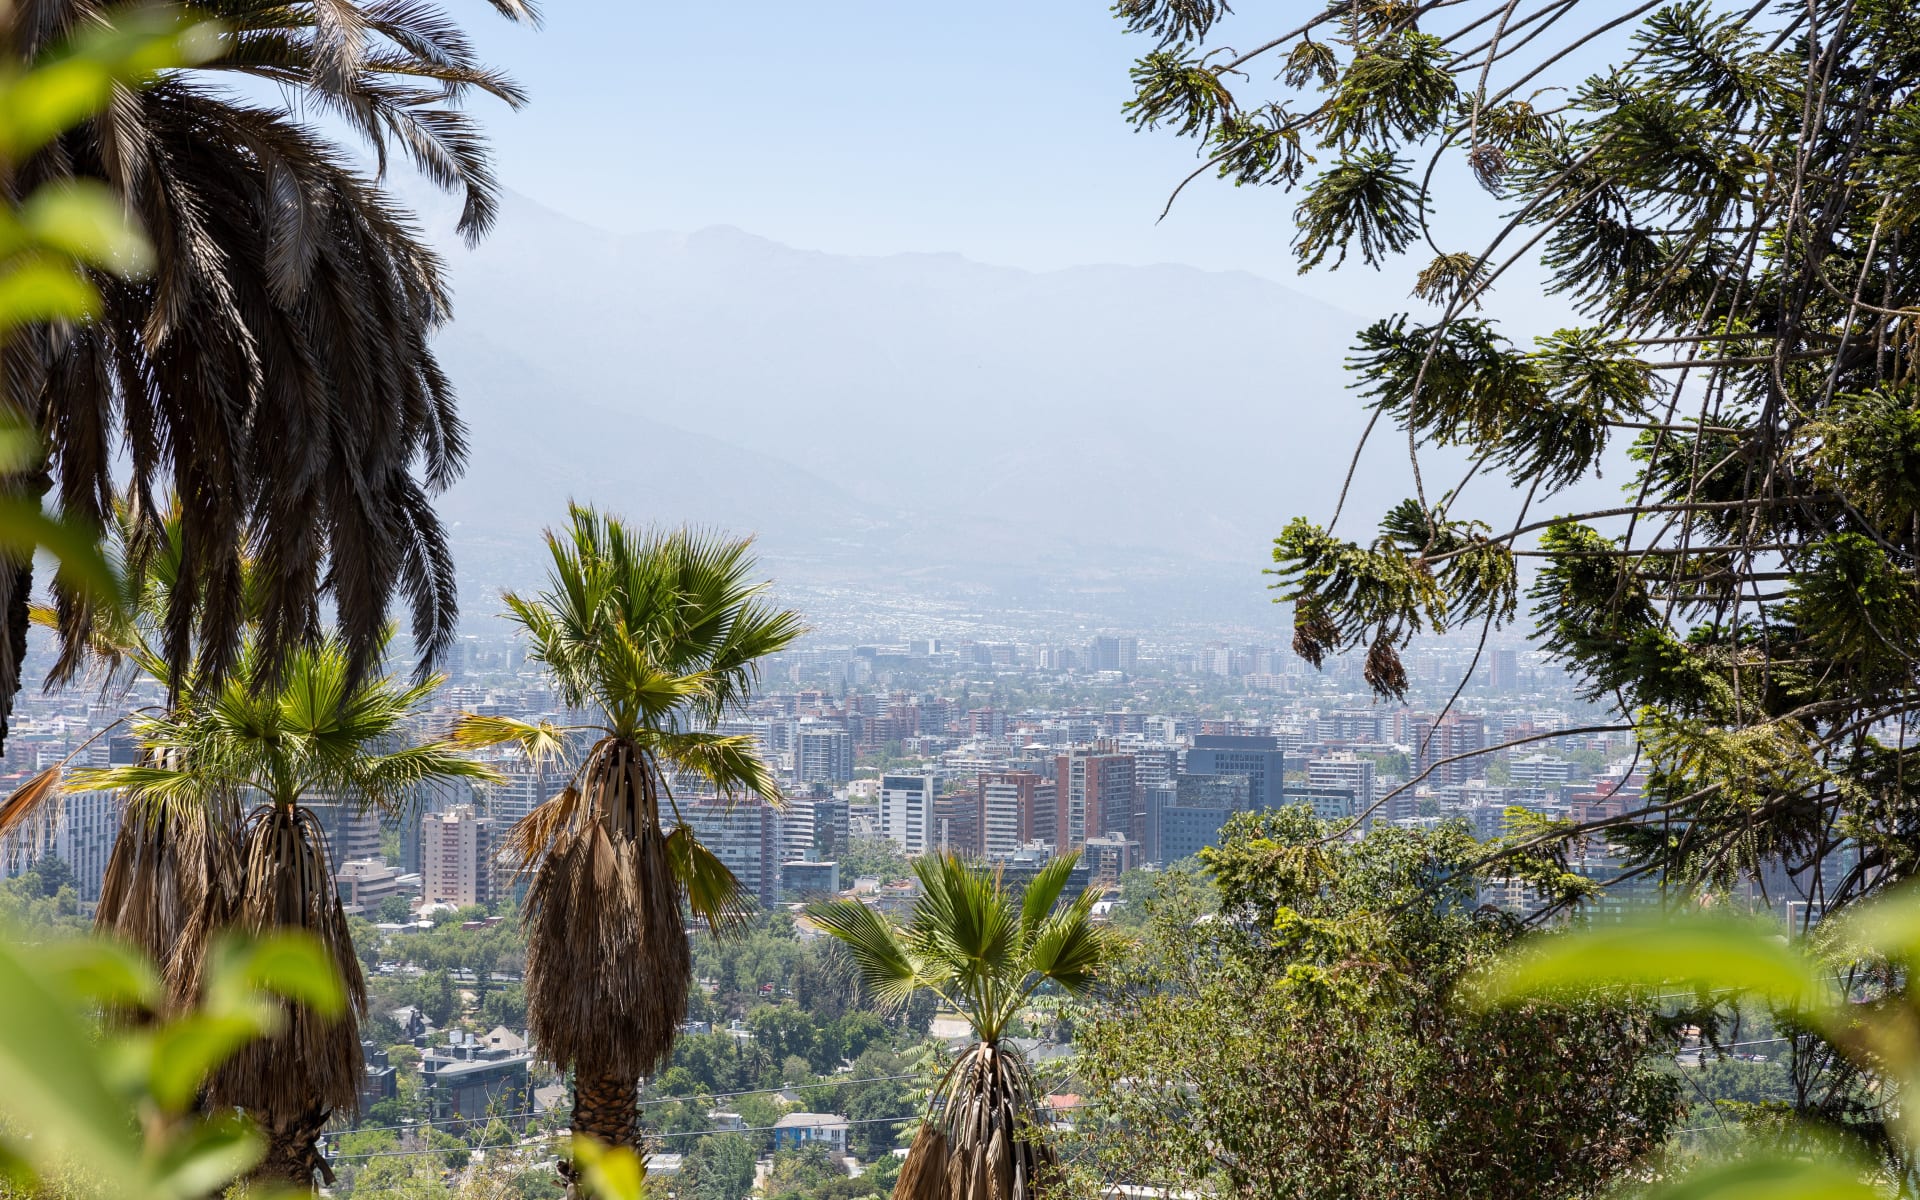 View of Santiago from the trees.